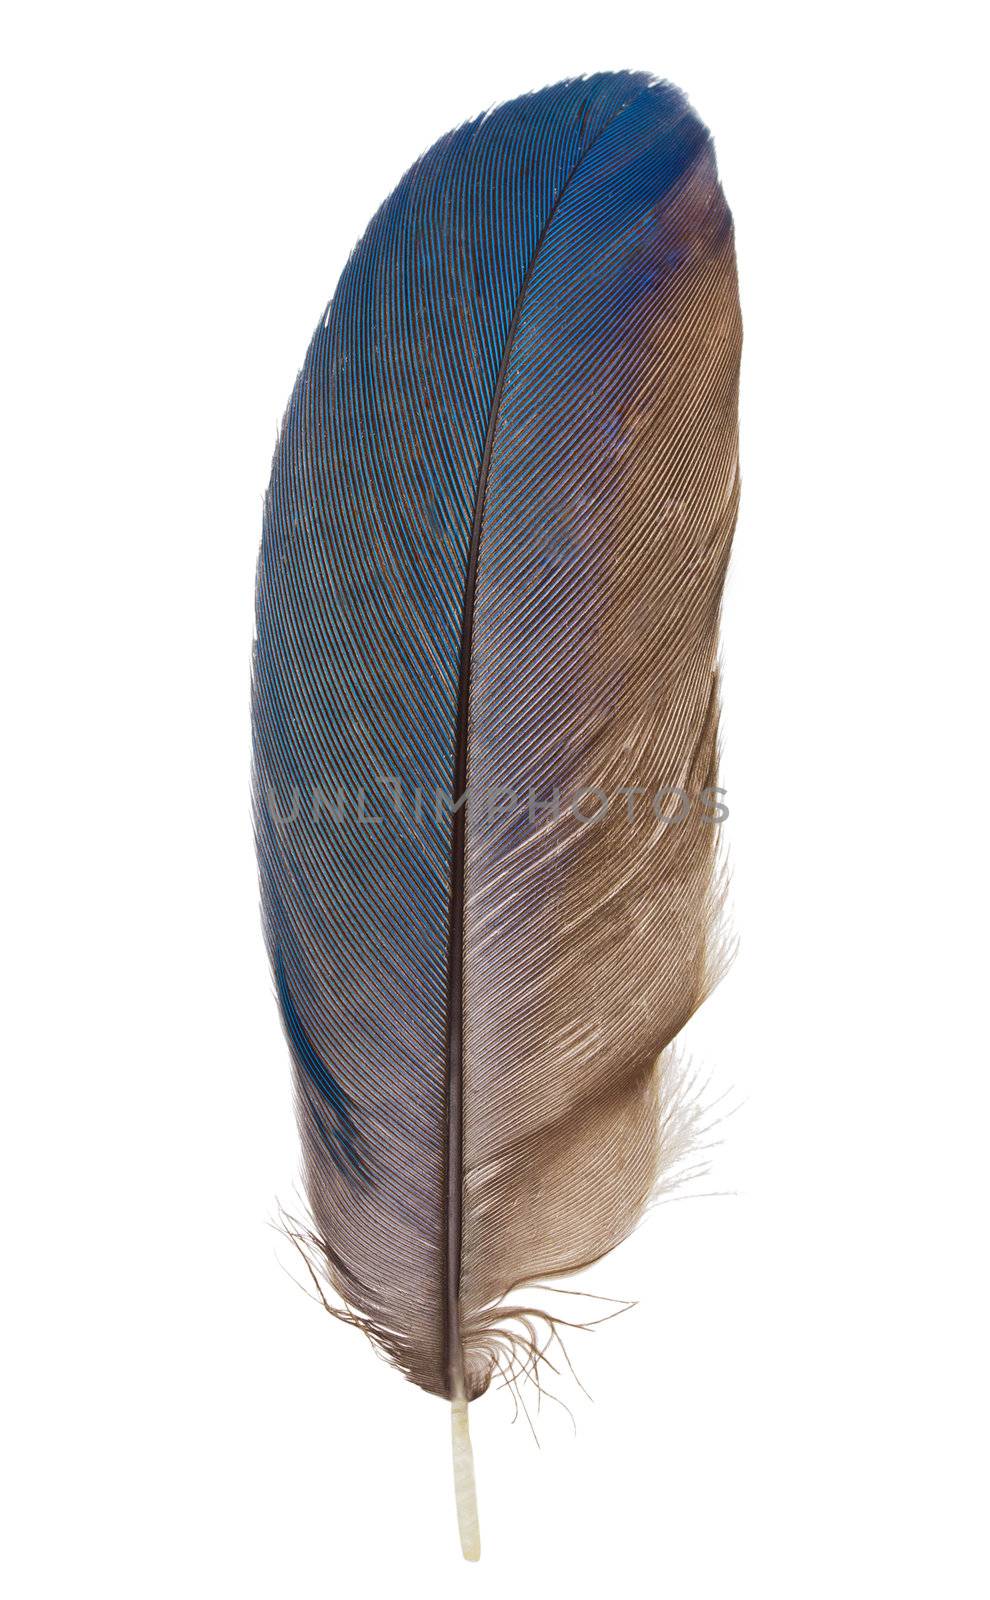 feather on white background by Alekcey